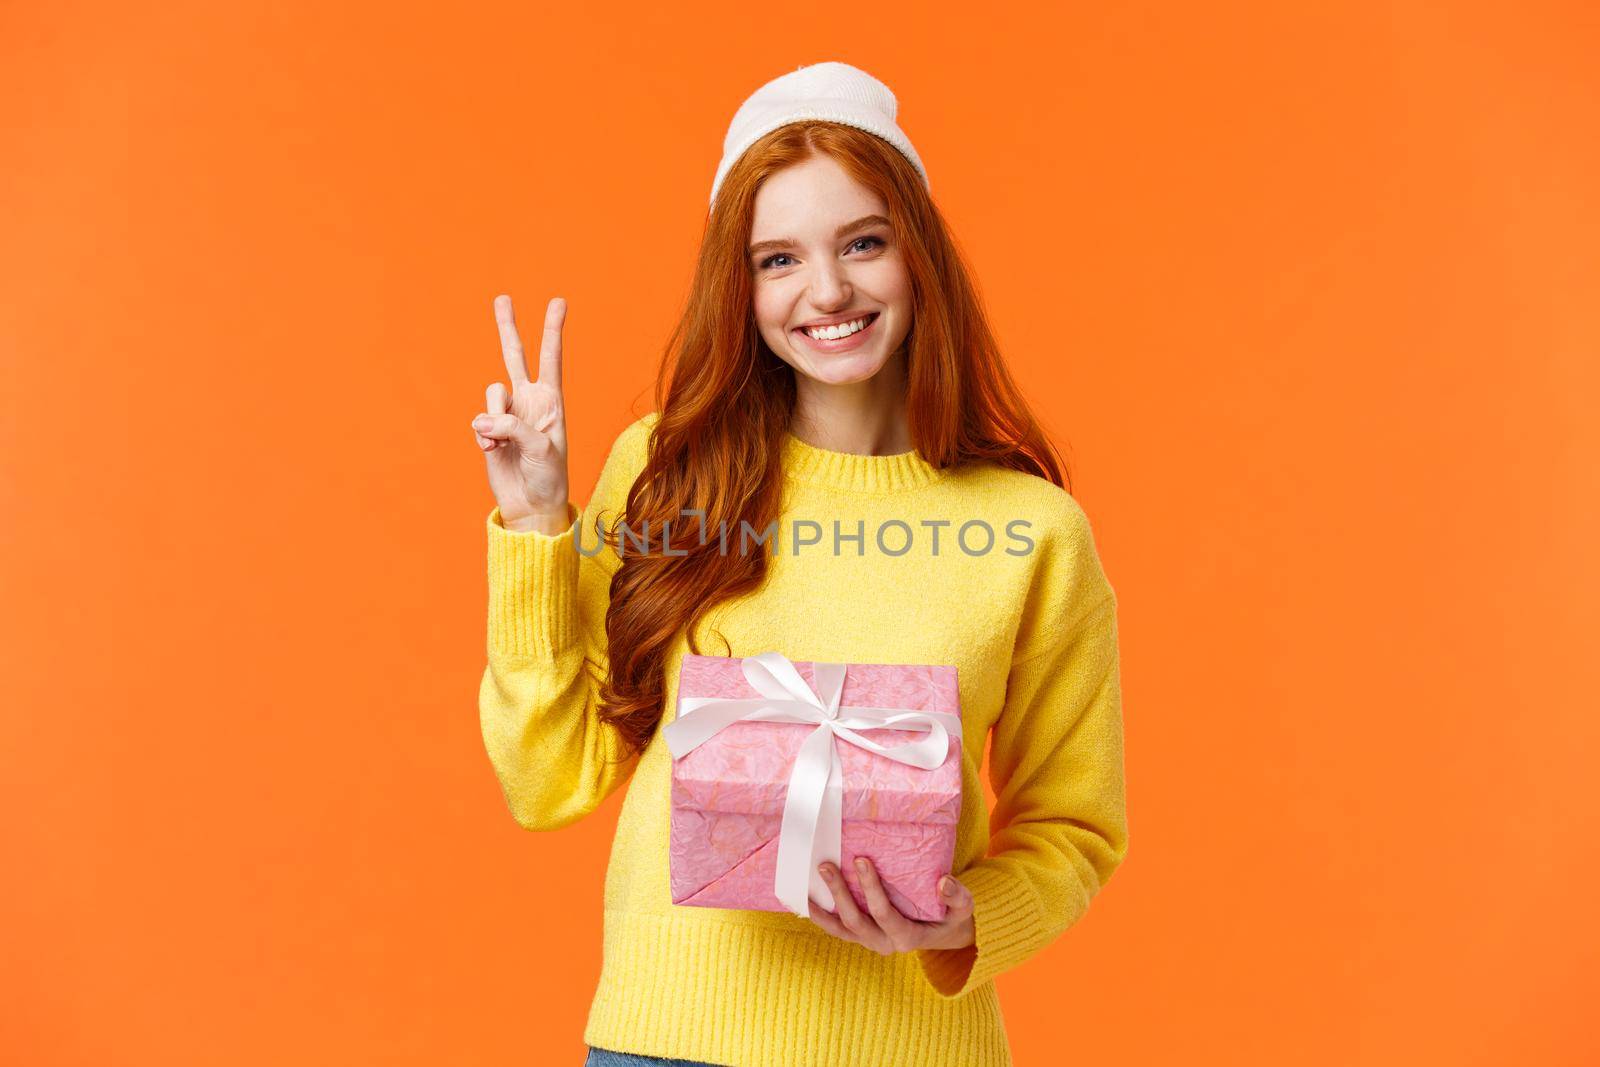 Celebration, holidays and presents concept. Cute cheerful redhead female in winter hat, sweater, holding pink present, showing peace sign as receive gift and smiling delighted, orange background.